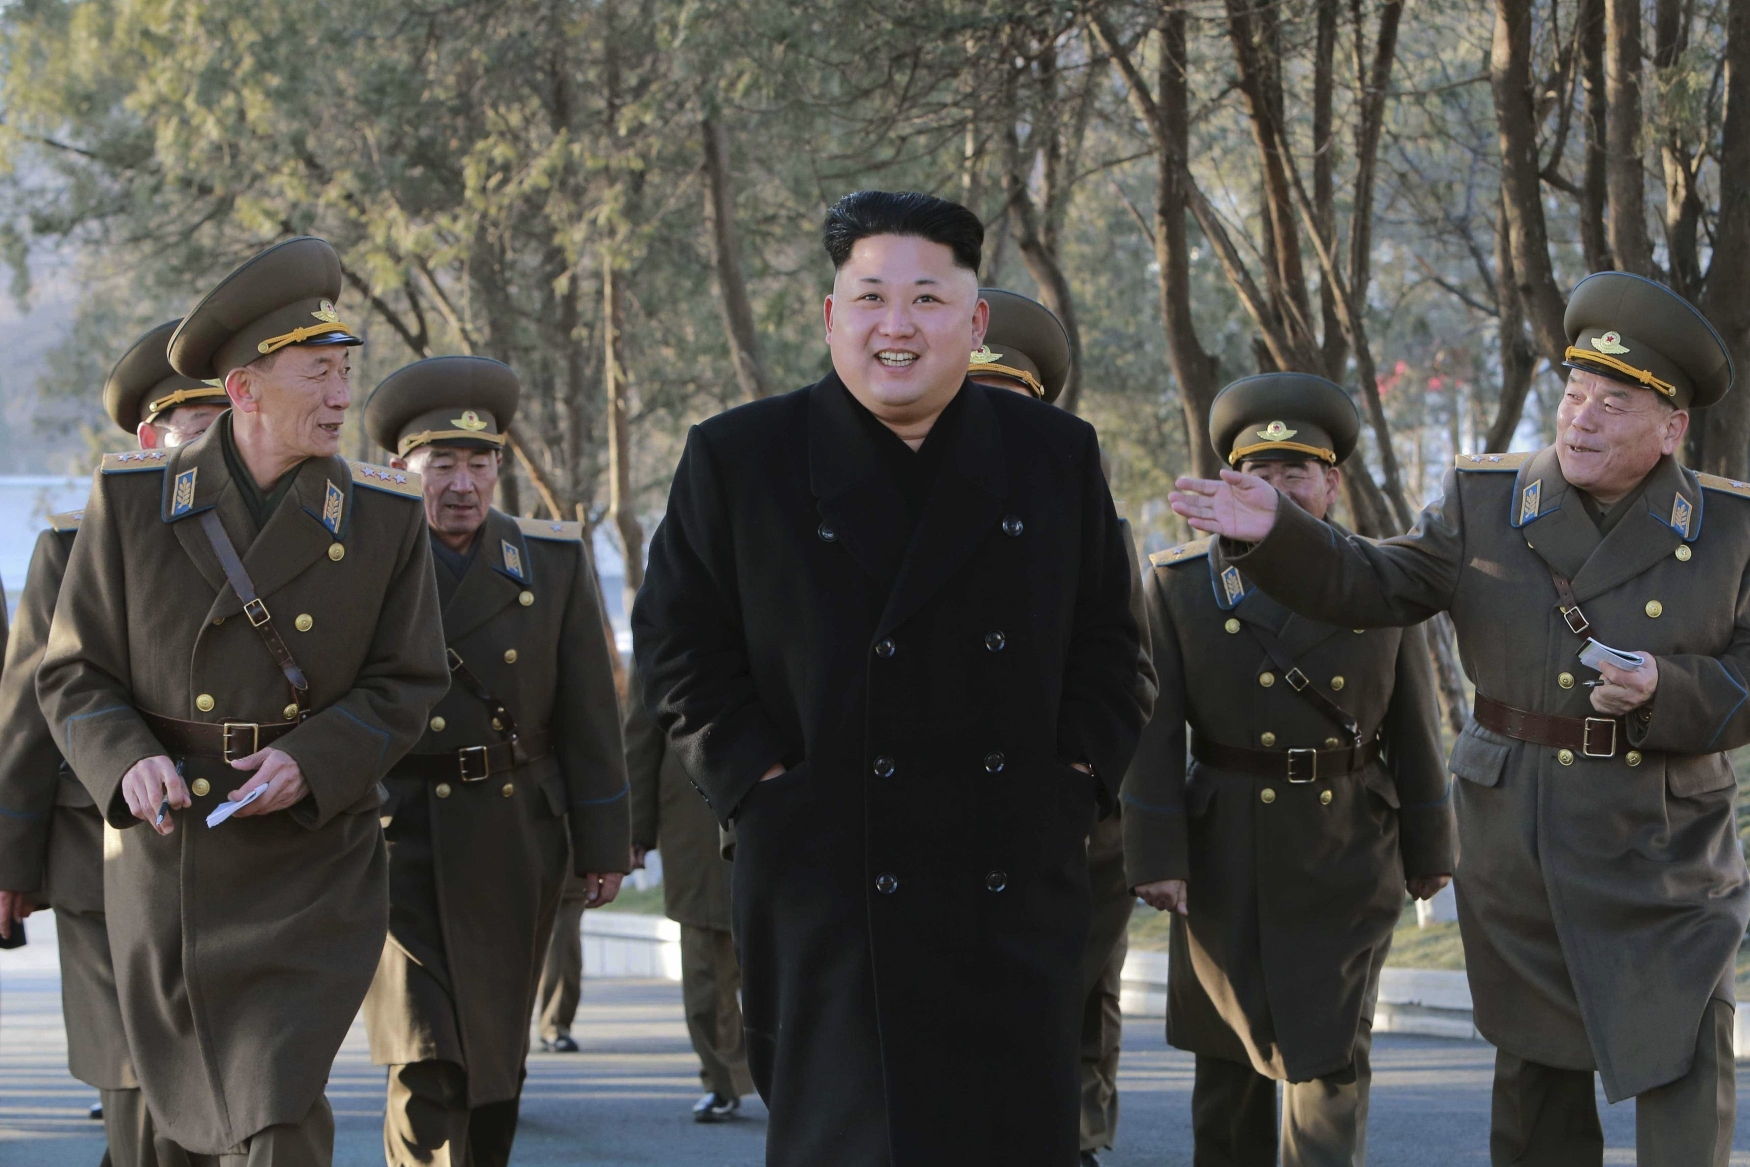 The North's behaviour almost certainly reflects mounting turmoil among the elite. Photo: KCNA/Reuters